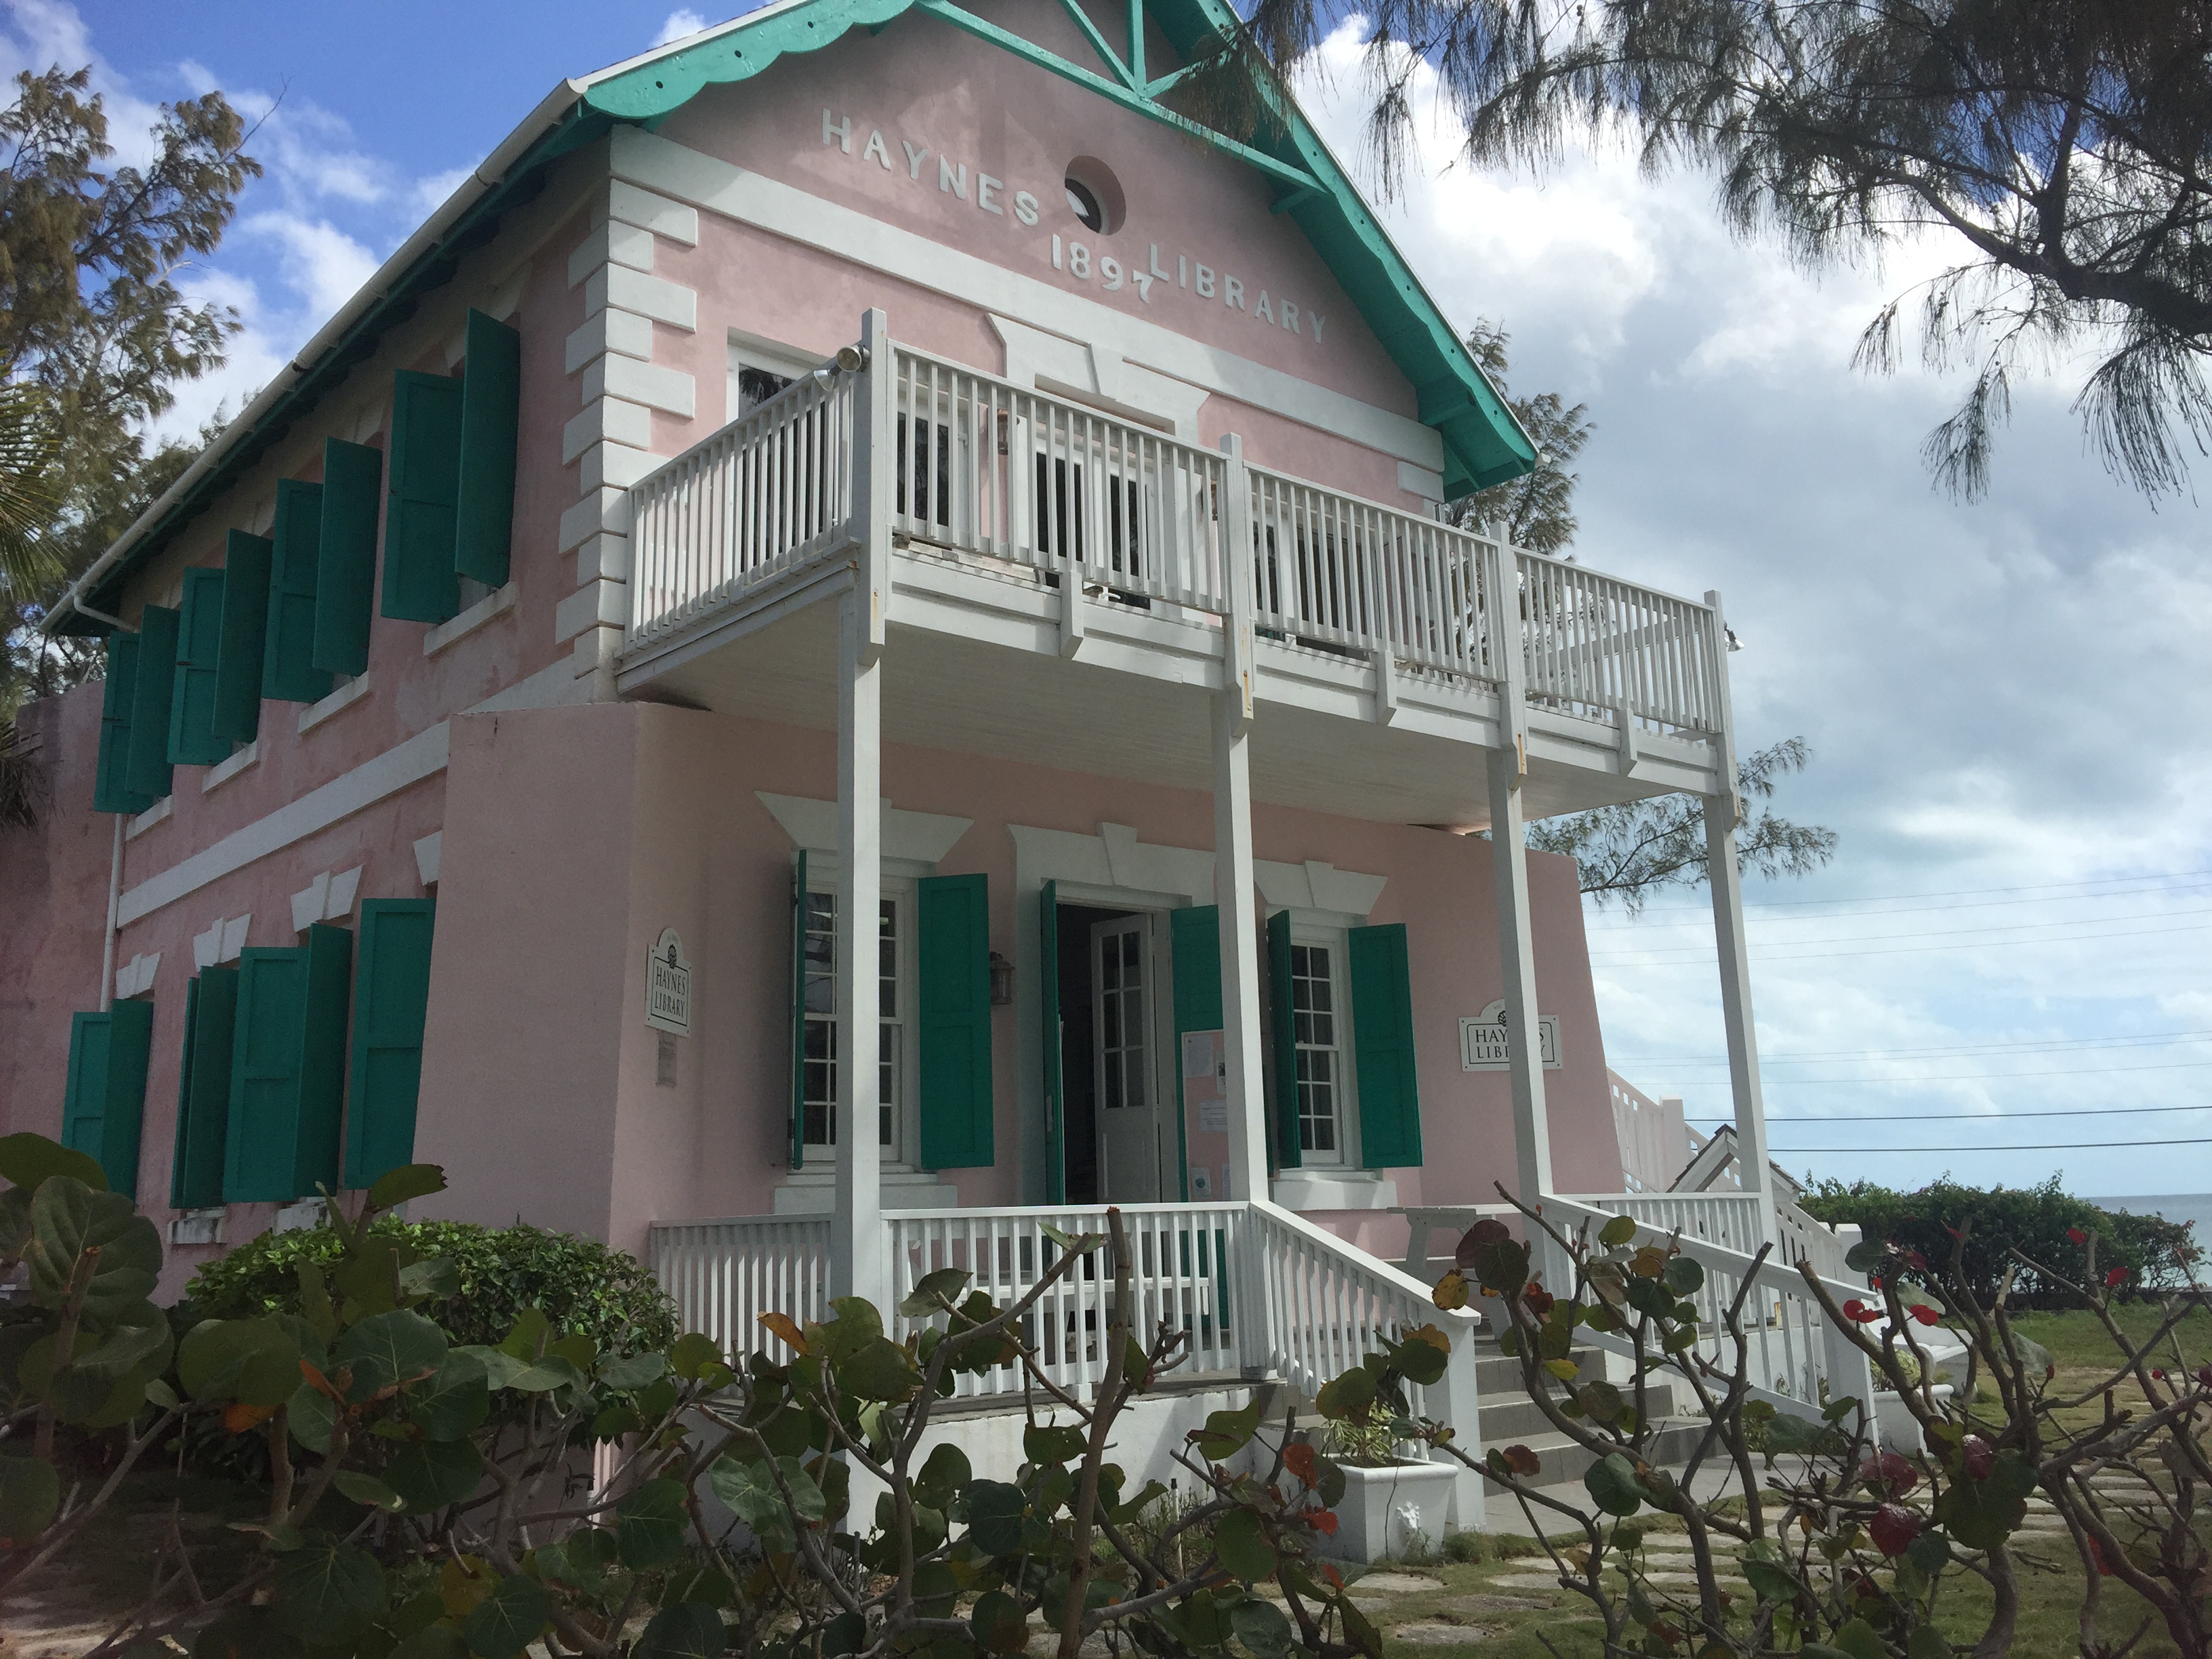 The library at Governors Harbour, the oldest library in the Bahamas